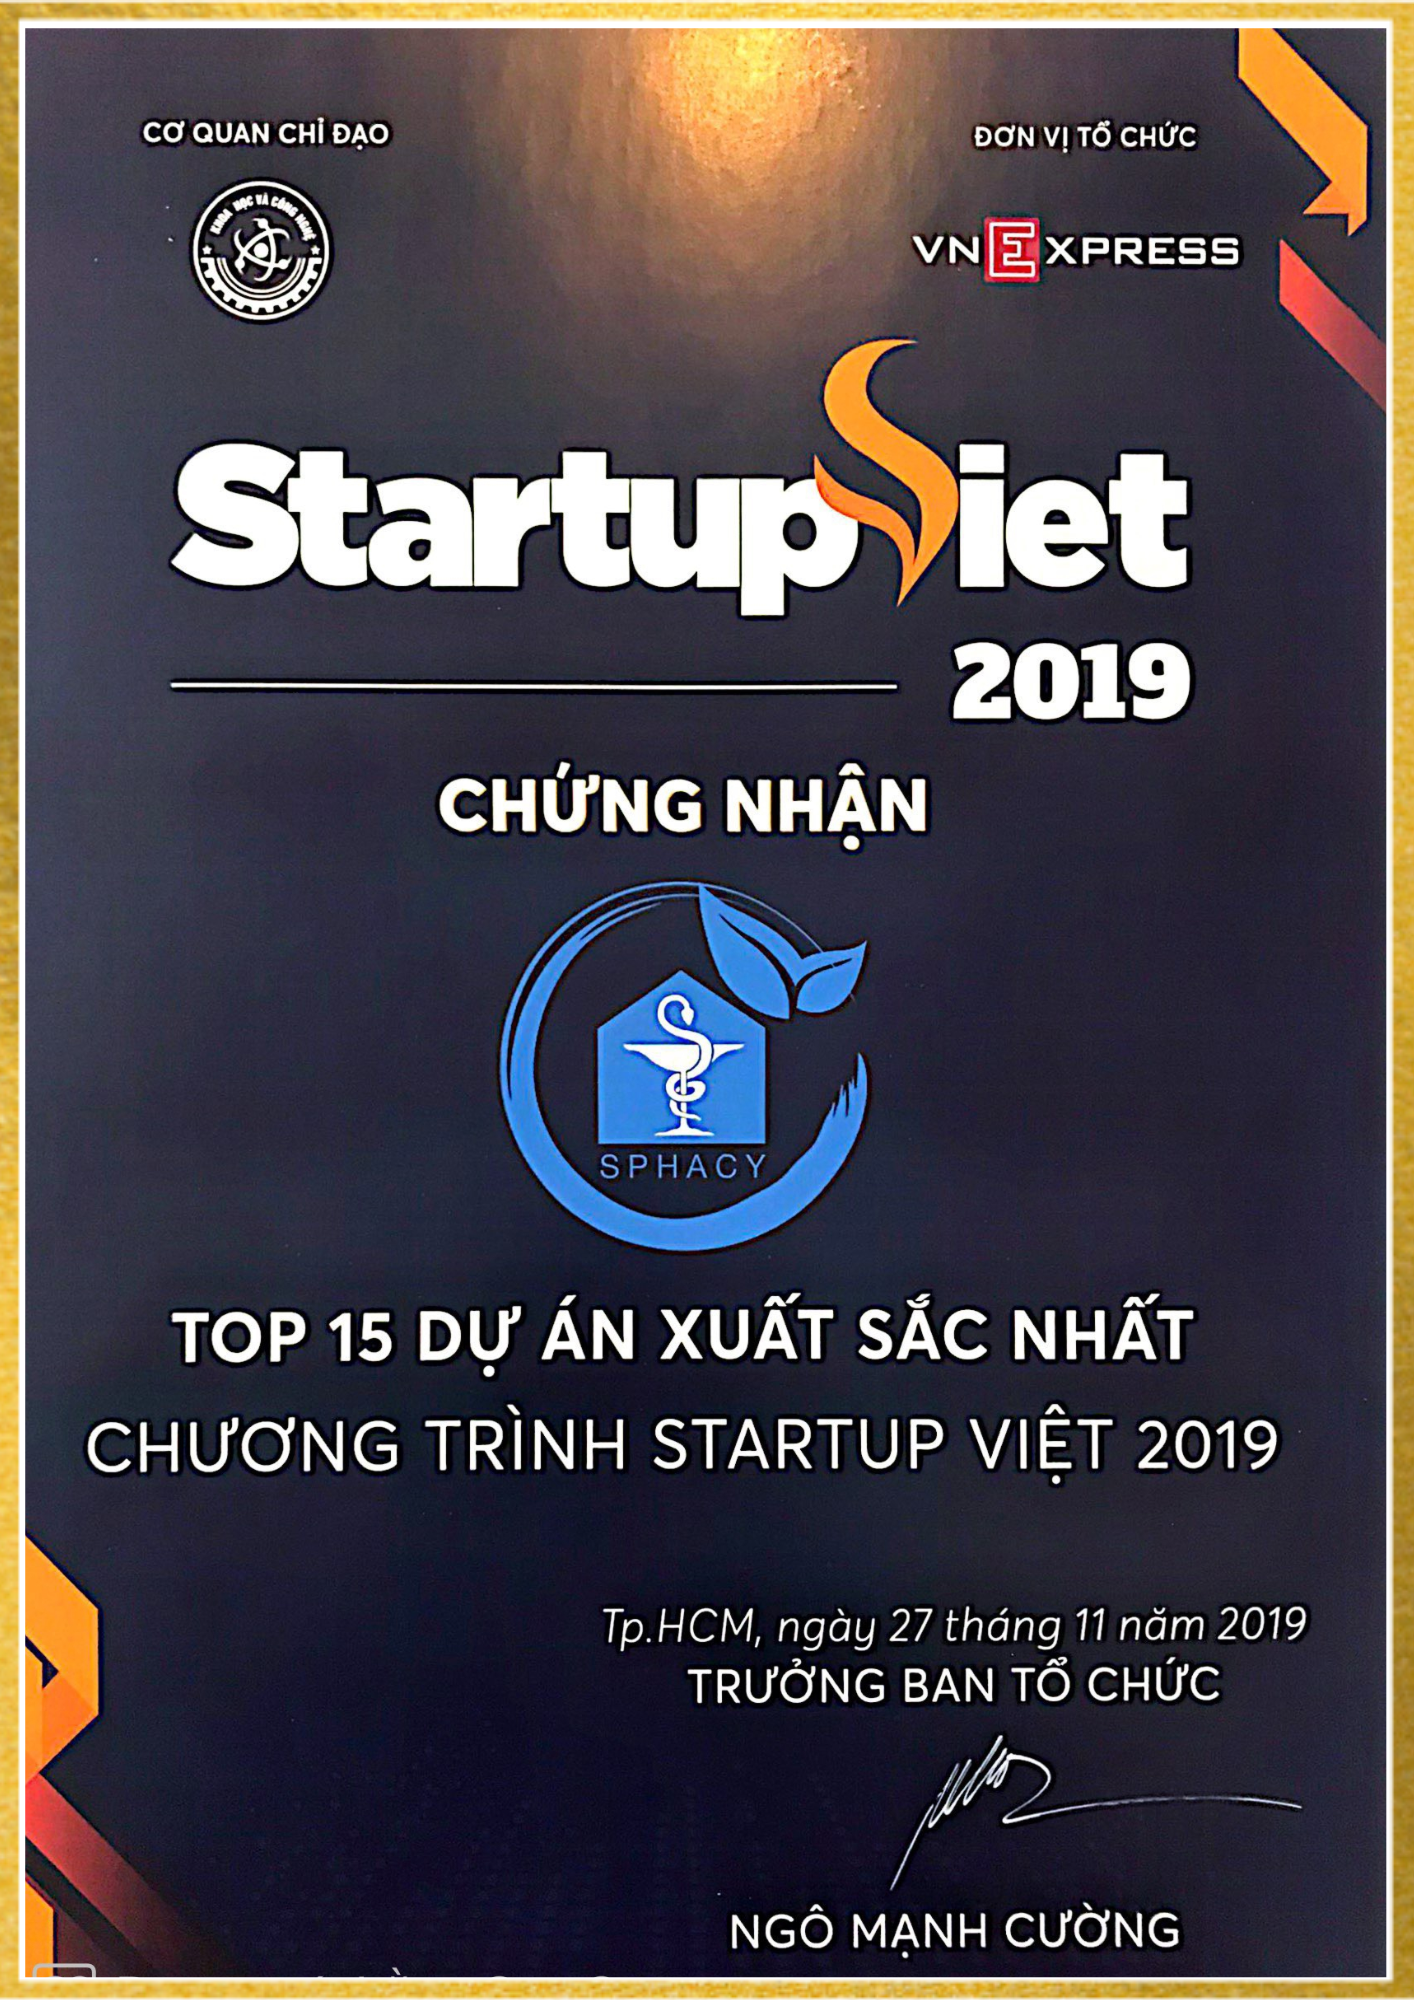 Top 15 Outstanding Startup Projects 2019